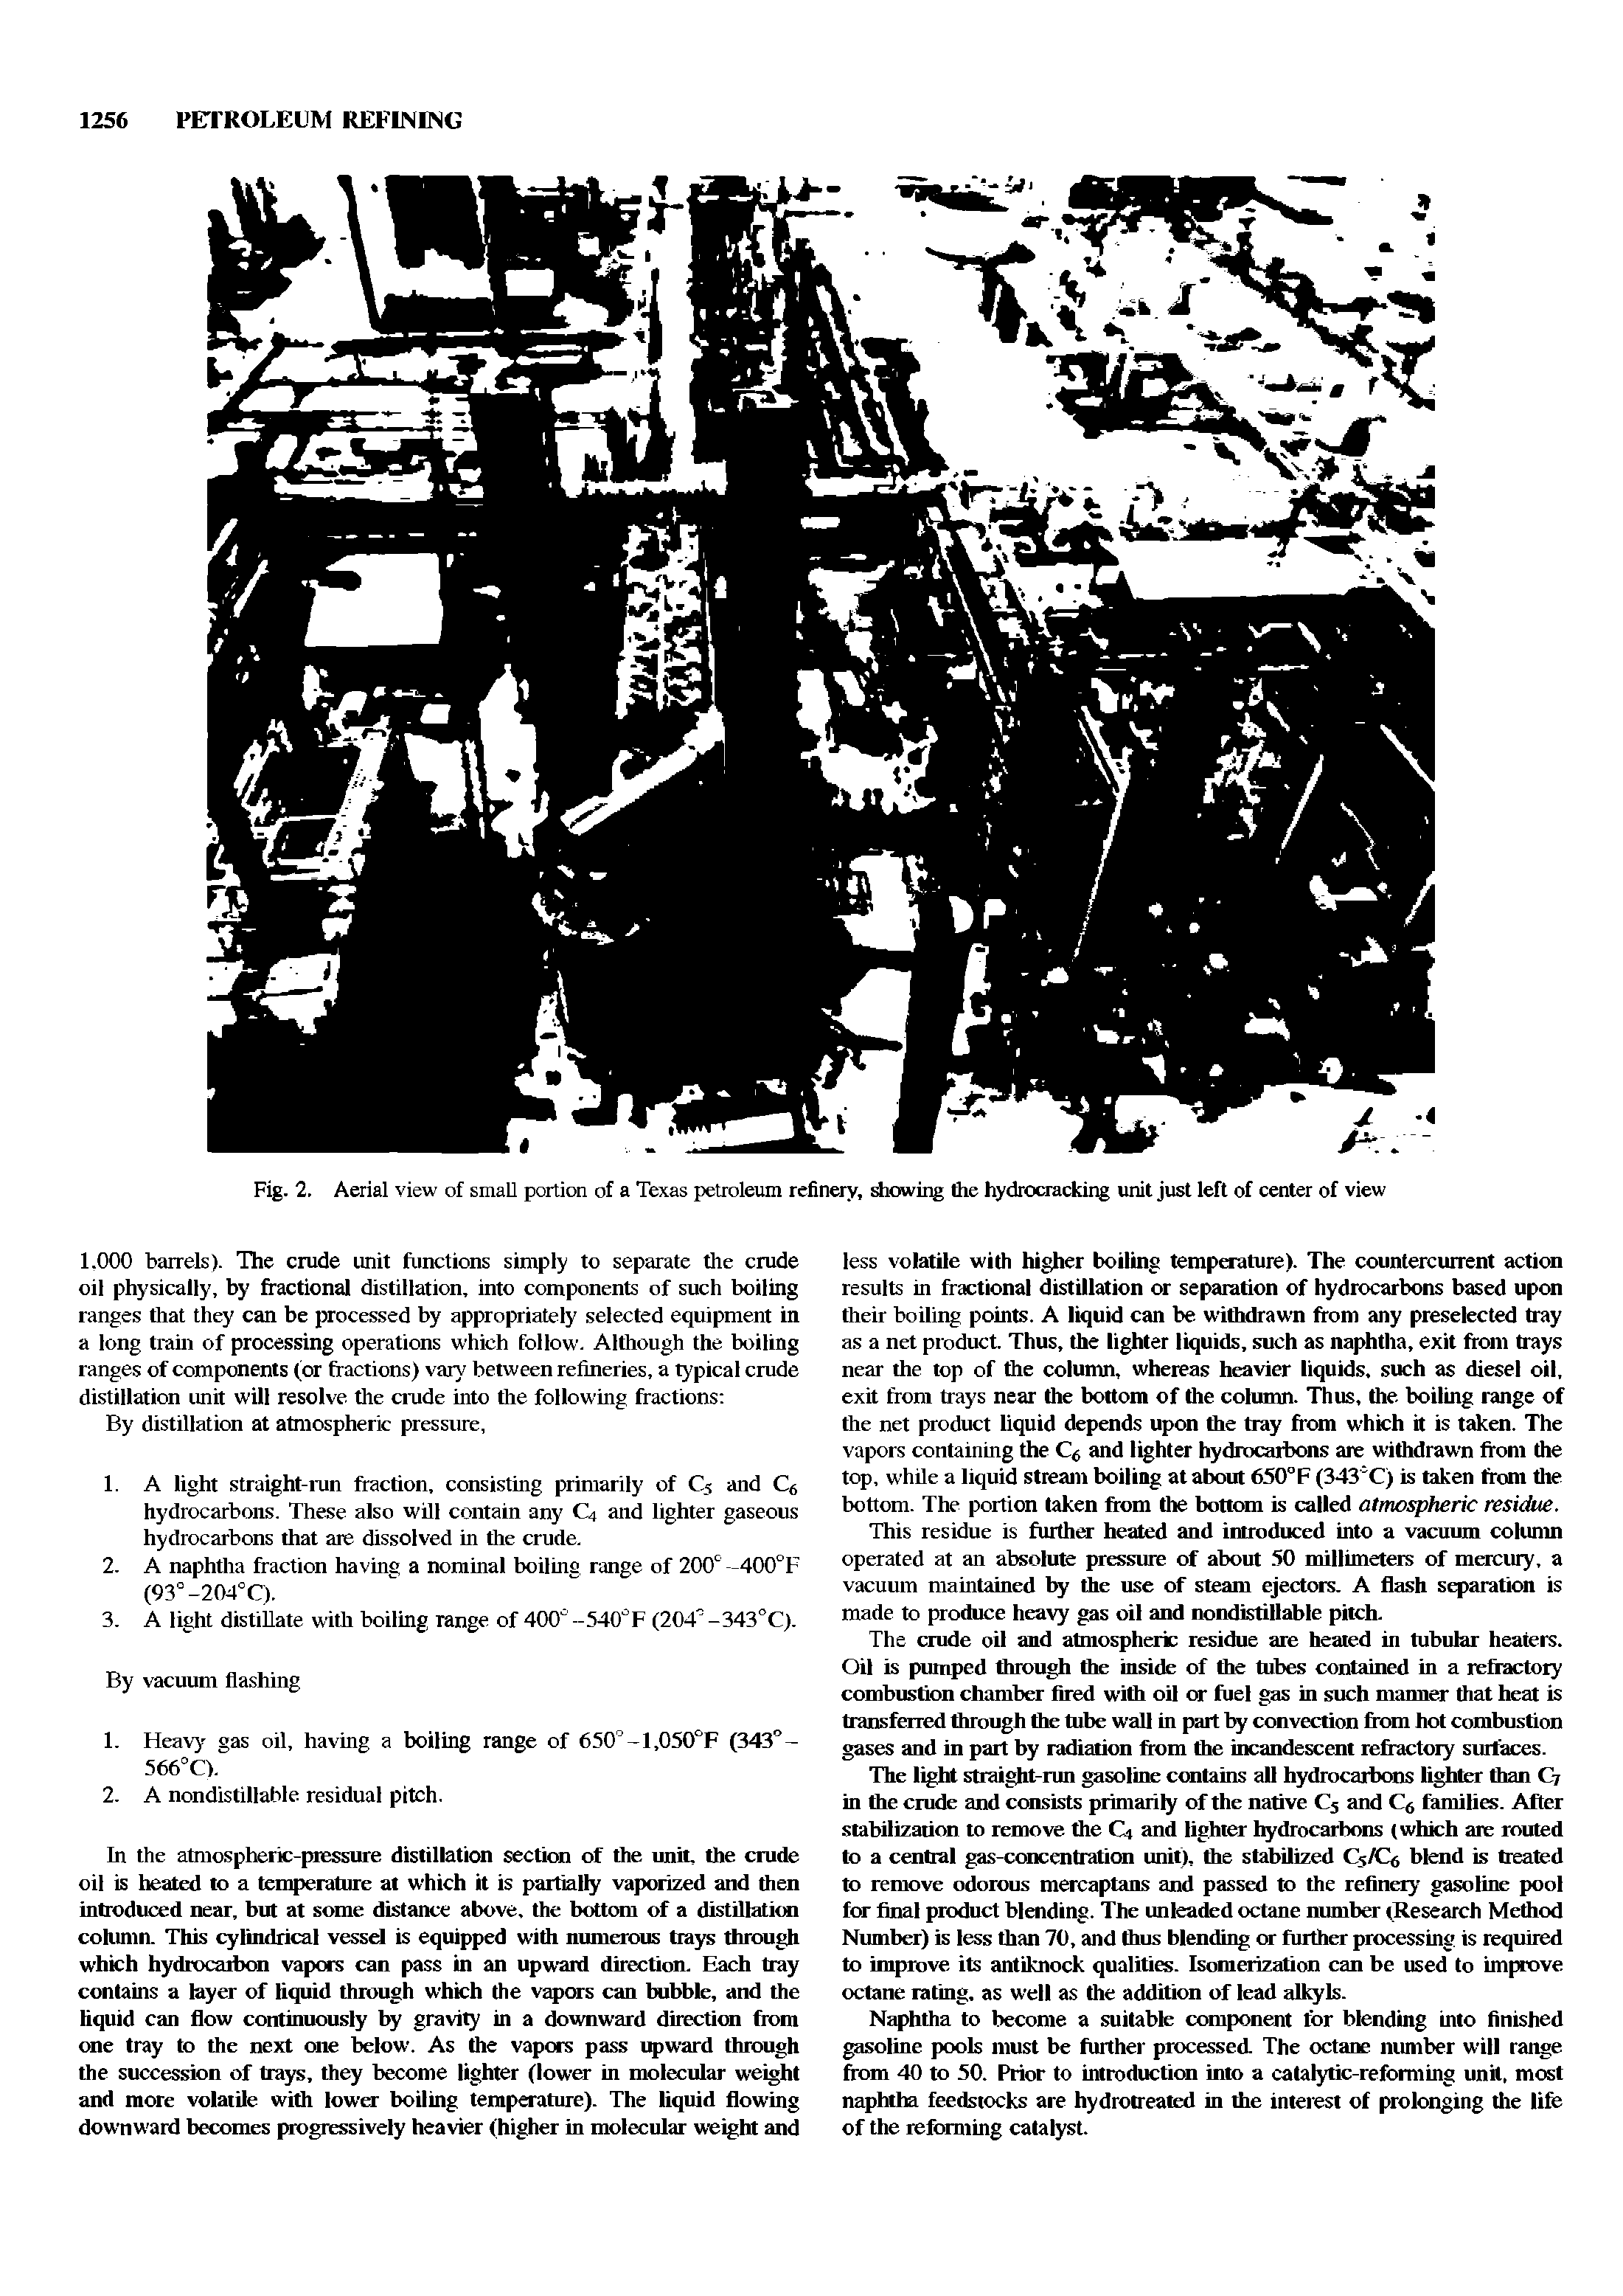 Fig. 2. Aerial view of small portion of a Texas petroleum refinery, showing the hydrocracking unit just left of center of view...